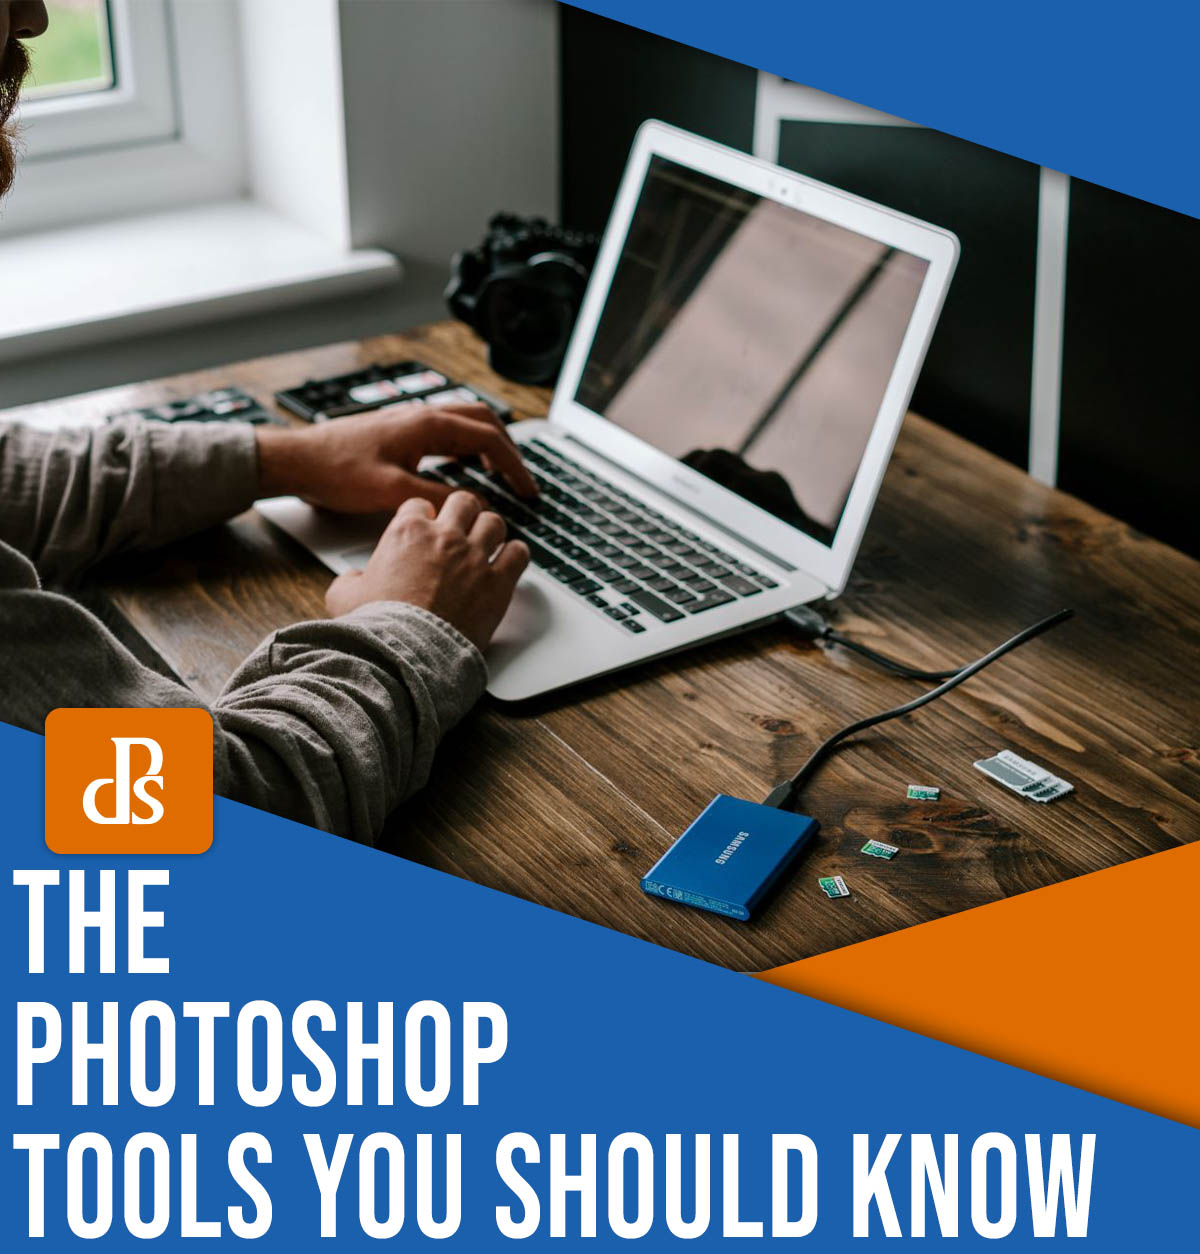 The Photoshop tools you should know